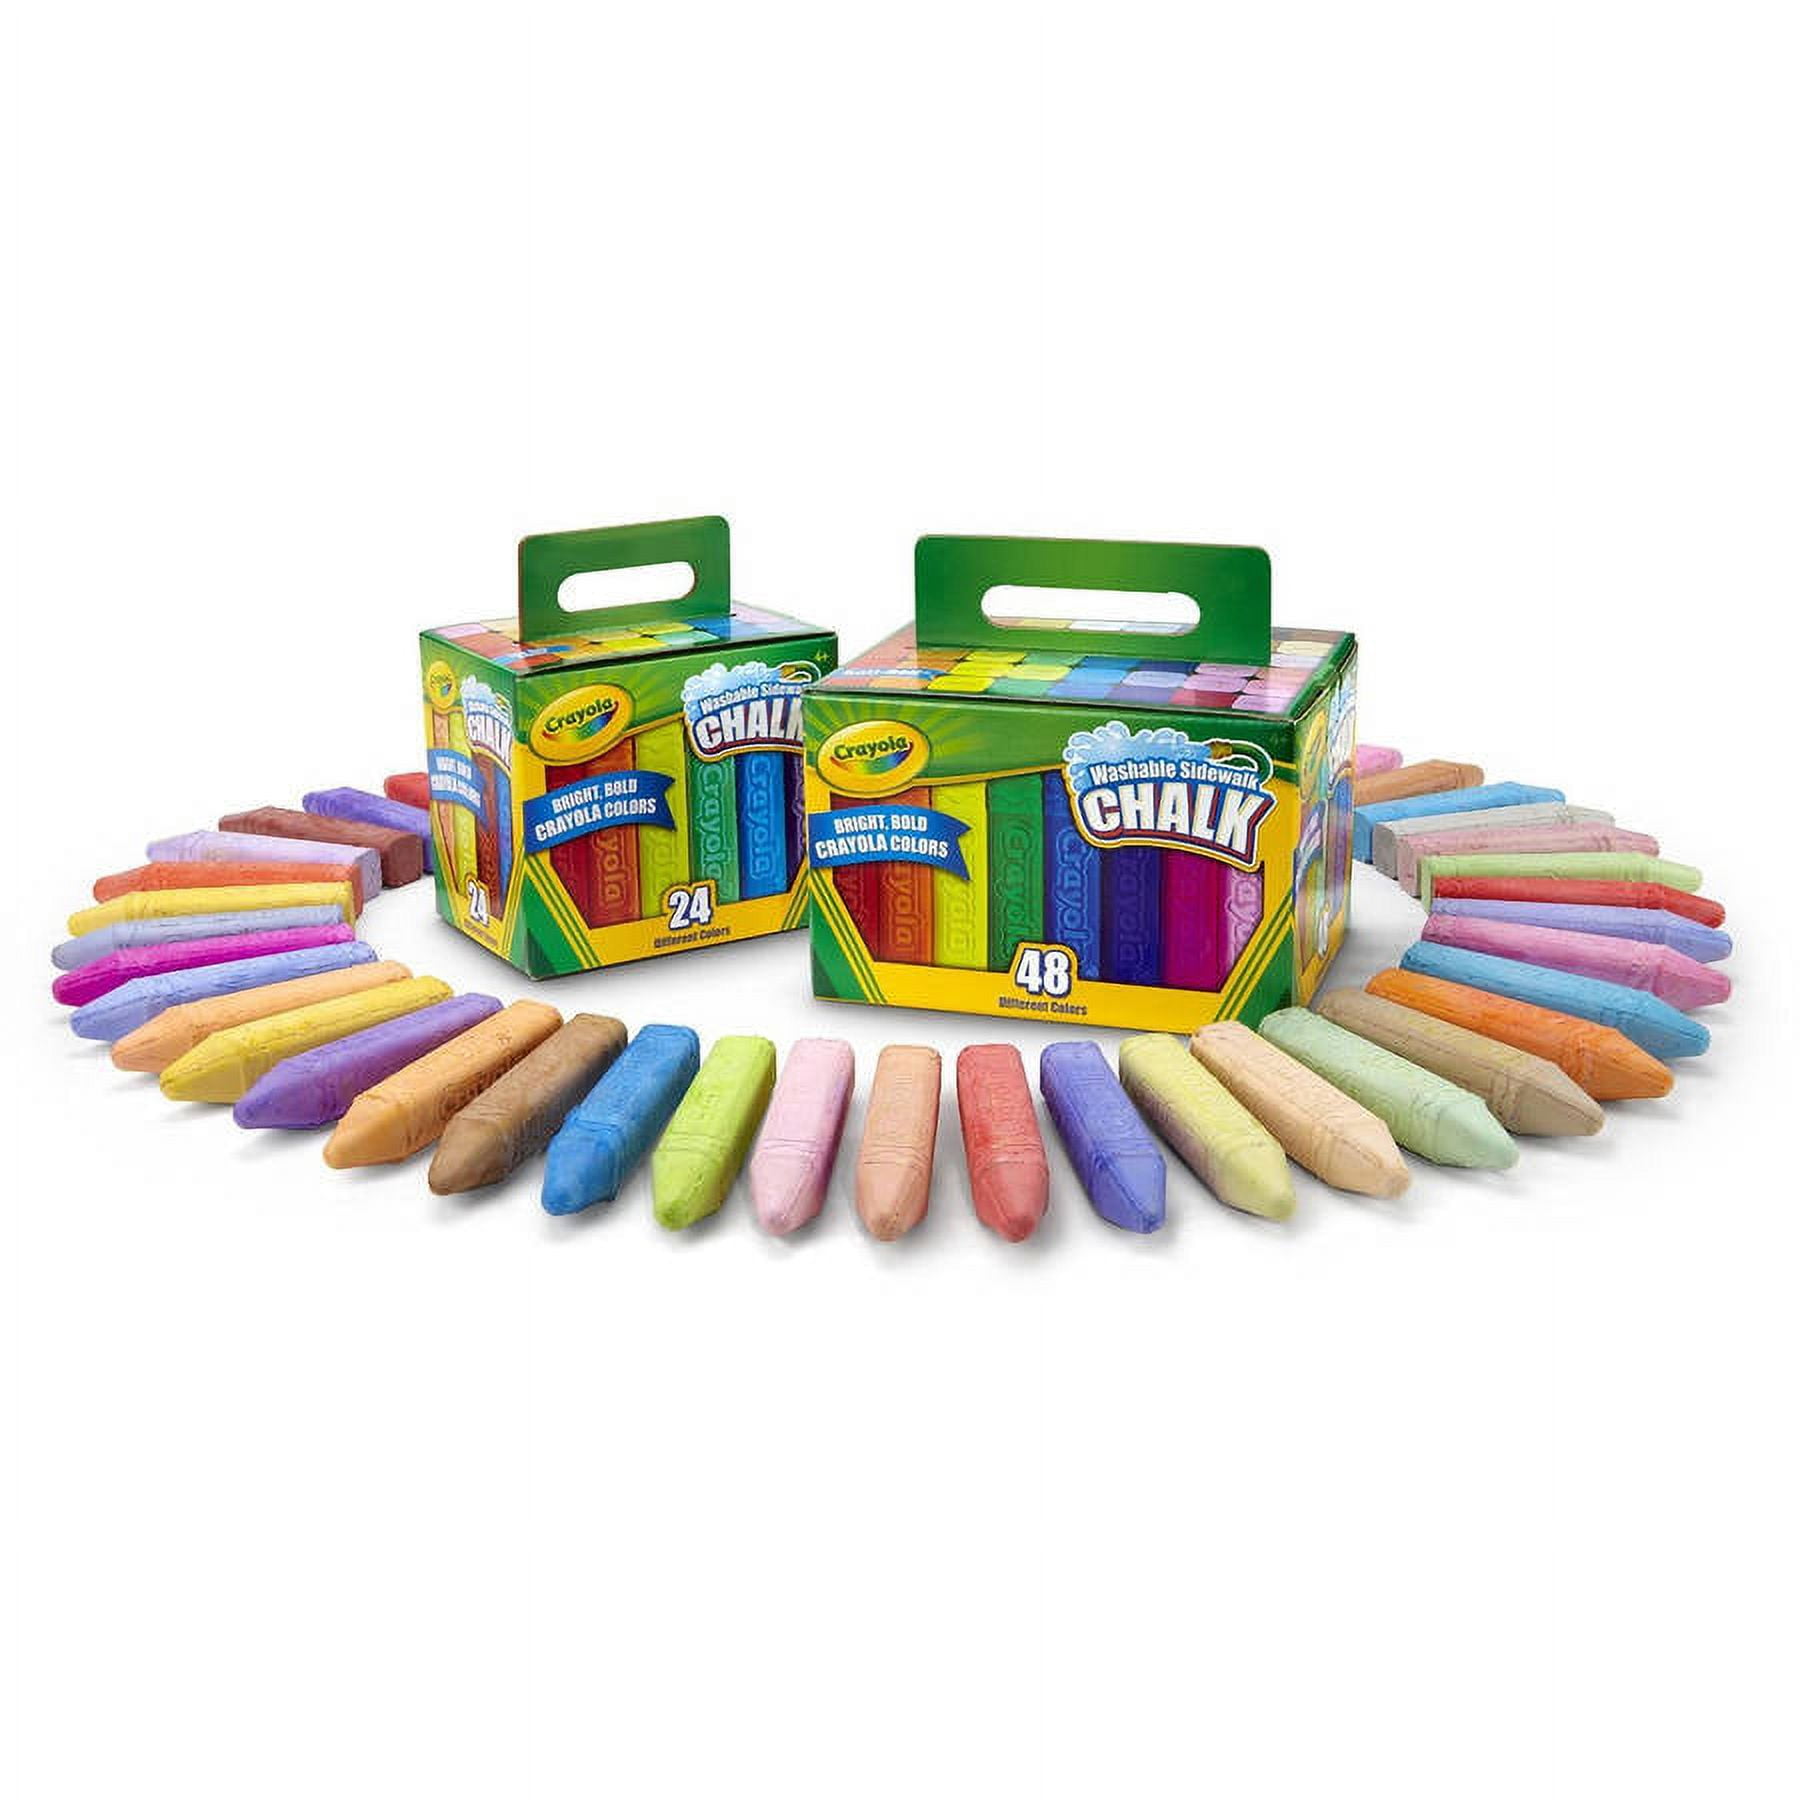 Crayola Crayon Set, 96-Colors, Stocking Stuffers for Kids, Holiday Gifts 